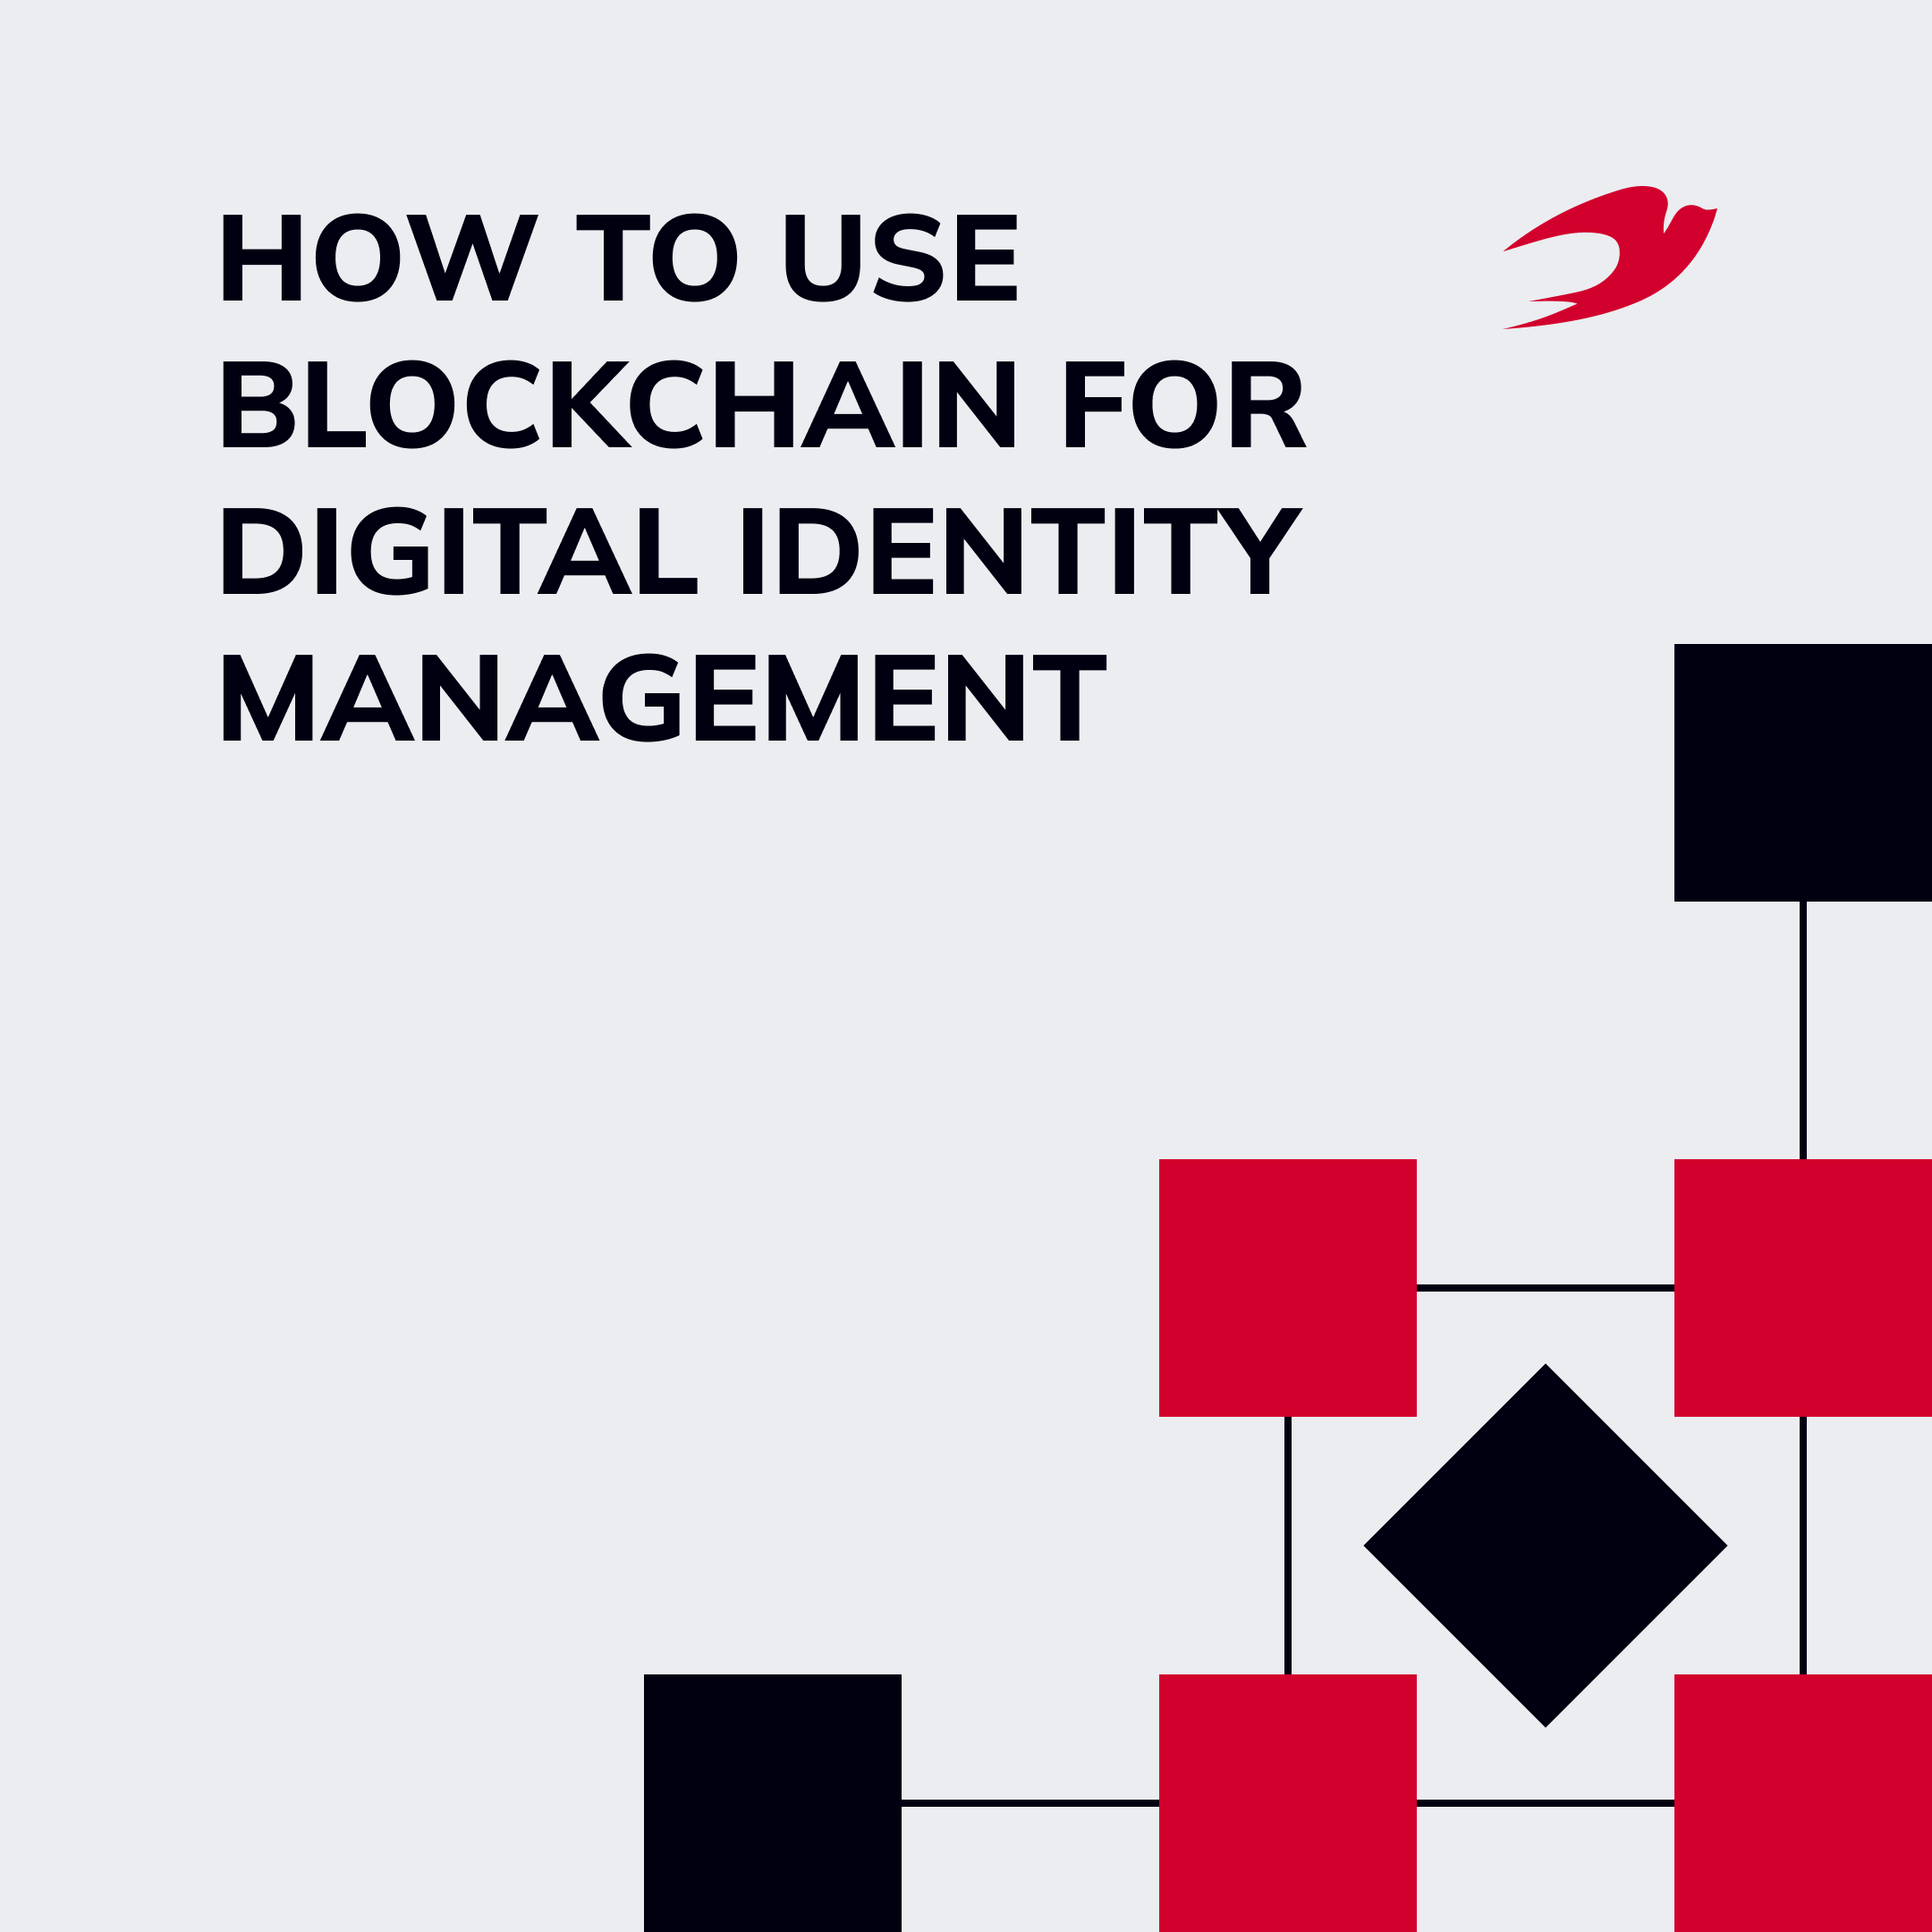 How to Use Blockchain for Digital Identity Management